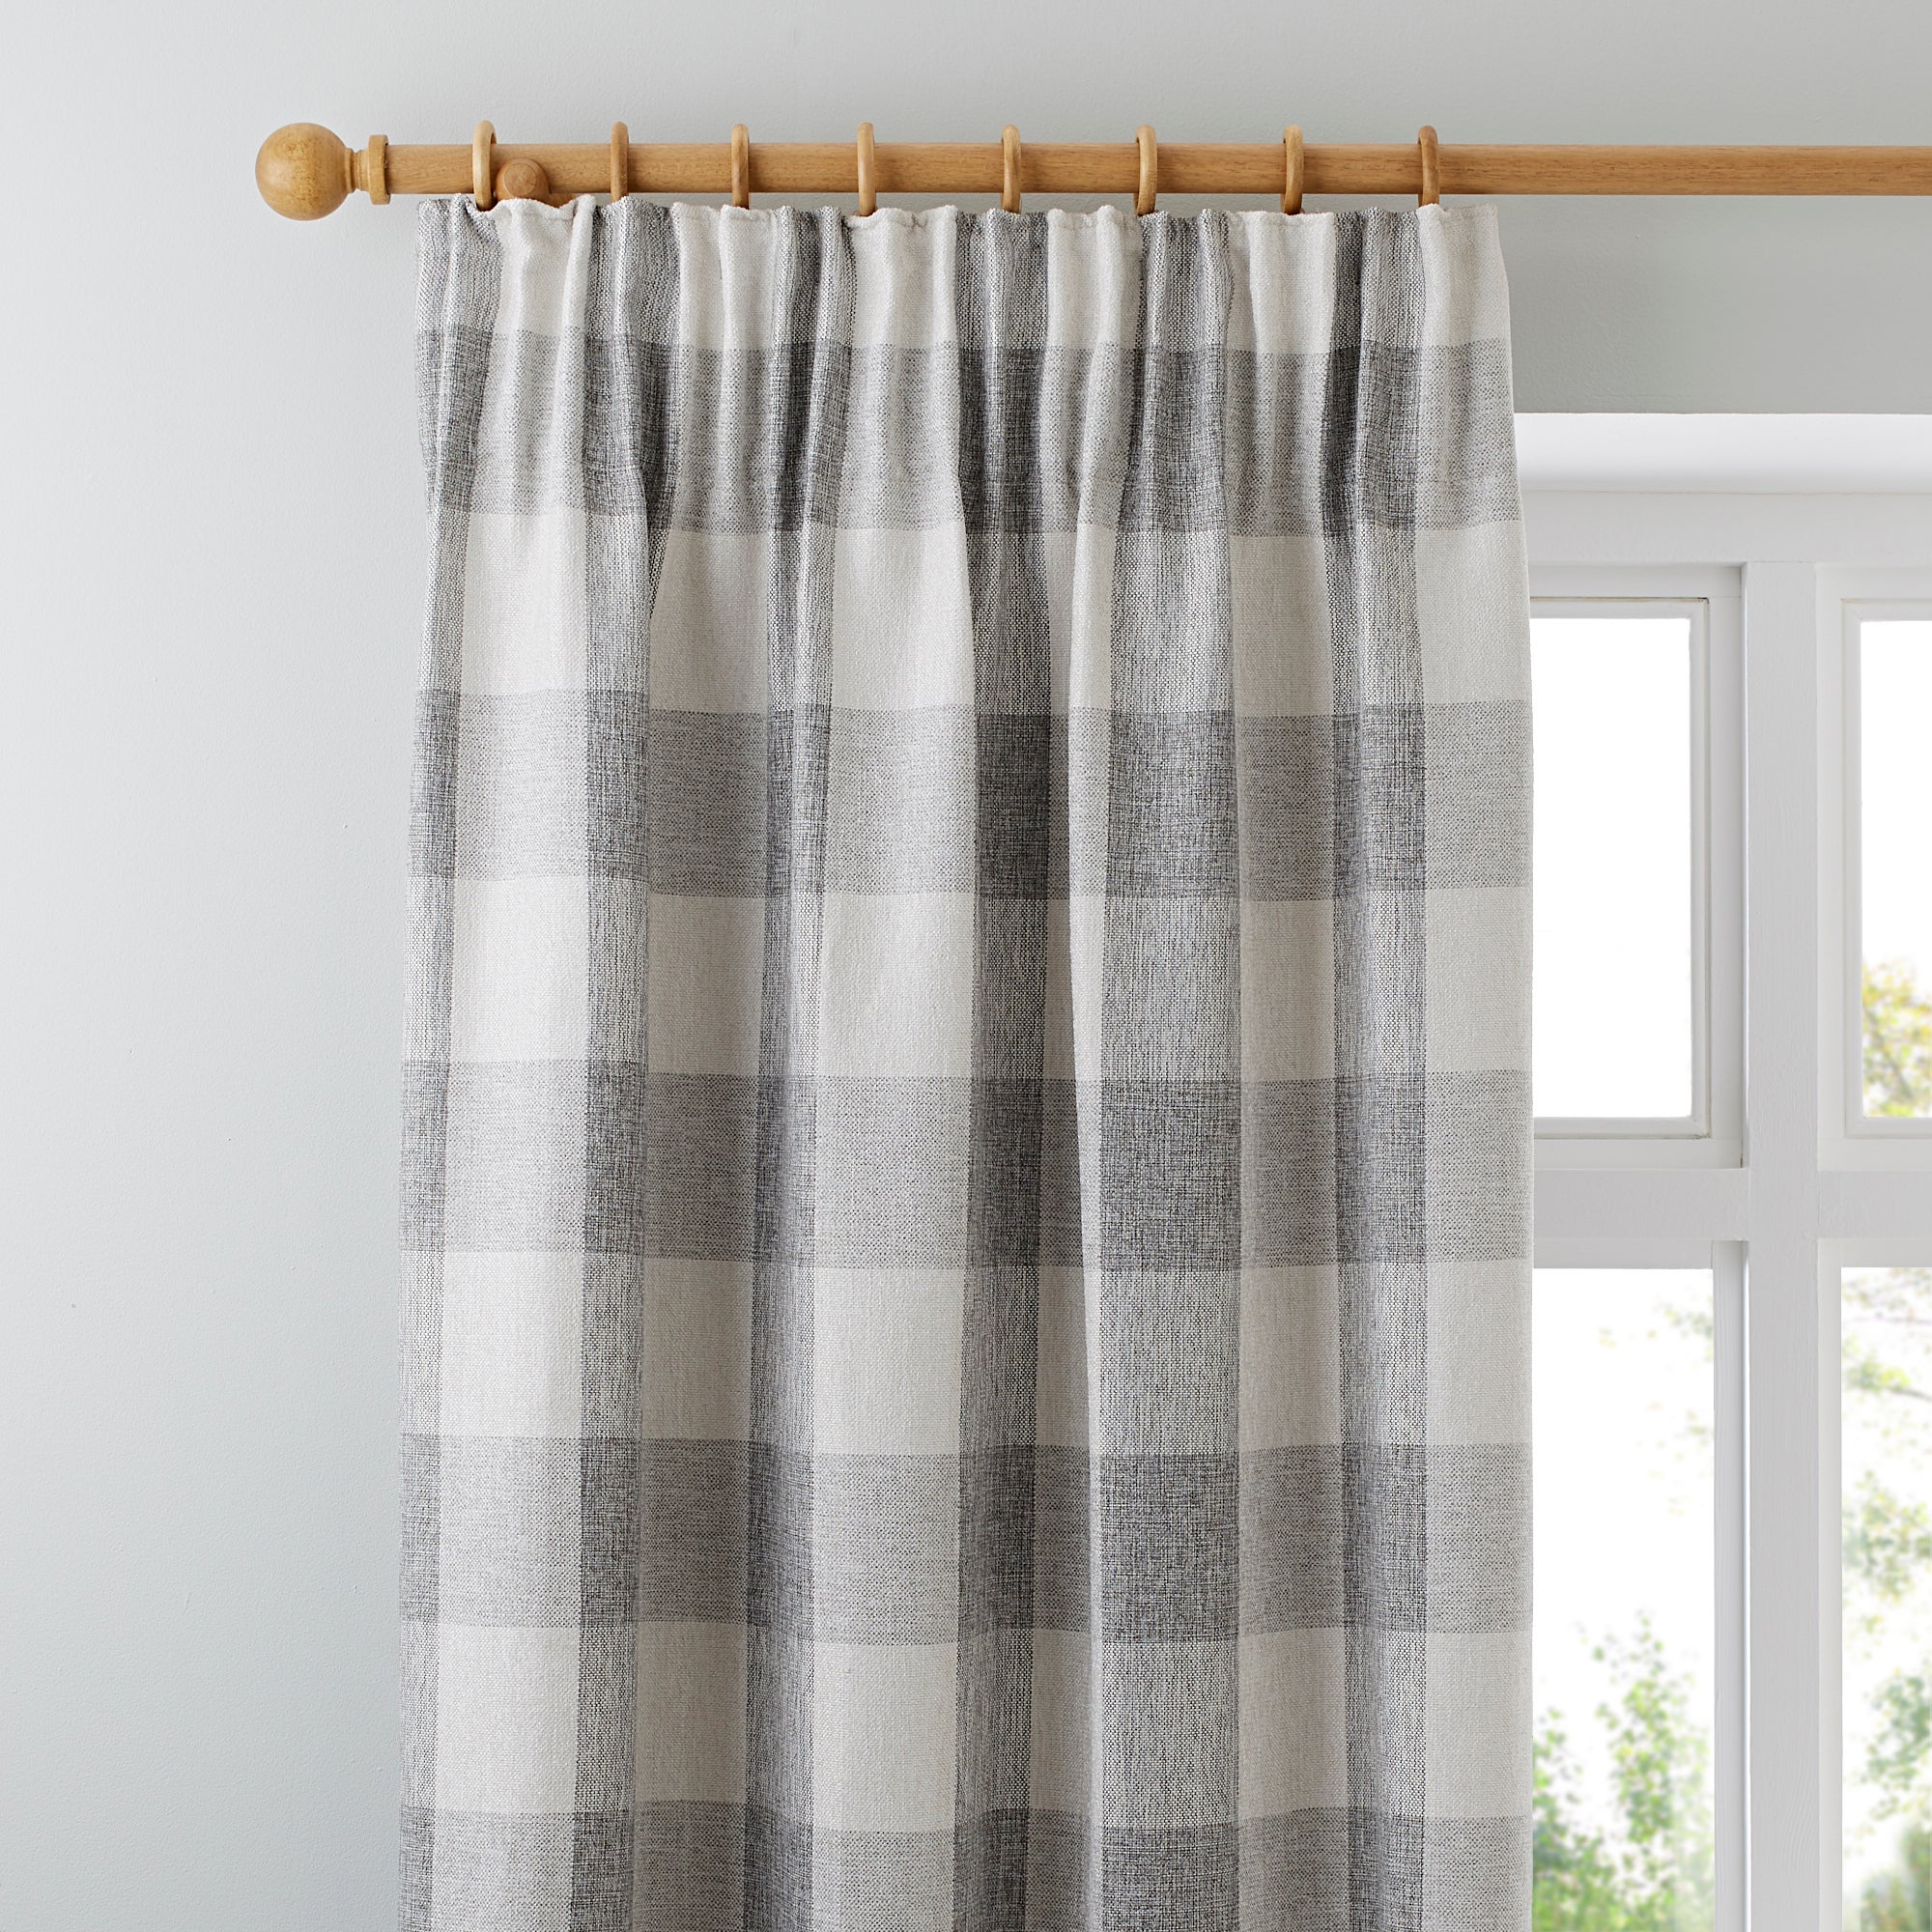 Skye Natural Lined Pencil Pleat Curtains | Dunelm